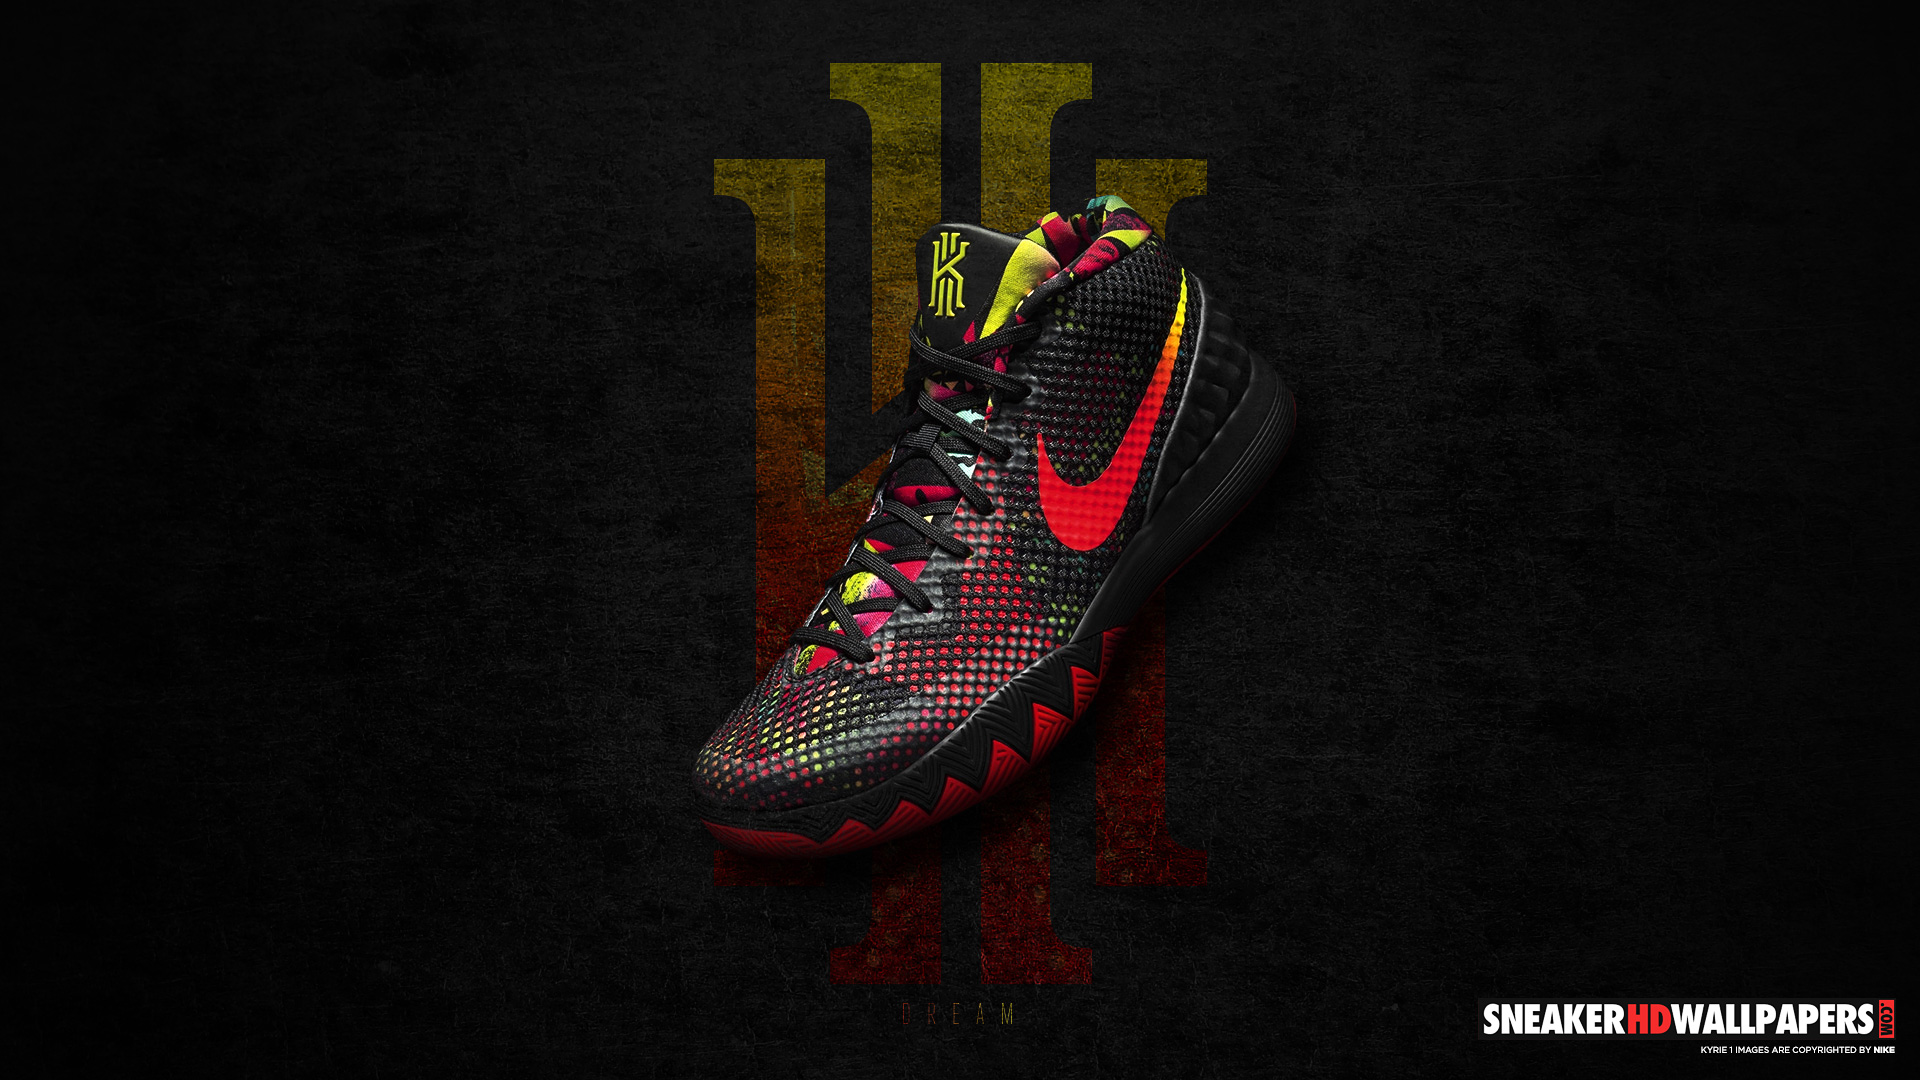  – Your favorite sneakers in 4K, Retina, Mobile and  HD wallpaper resolutions! » Blog Archive Kyrie 1 'Dream' wallpaper! -   - Your favorite sneakers in 4K, Retina, Mobile and  HD wallpaper resolutions!